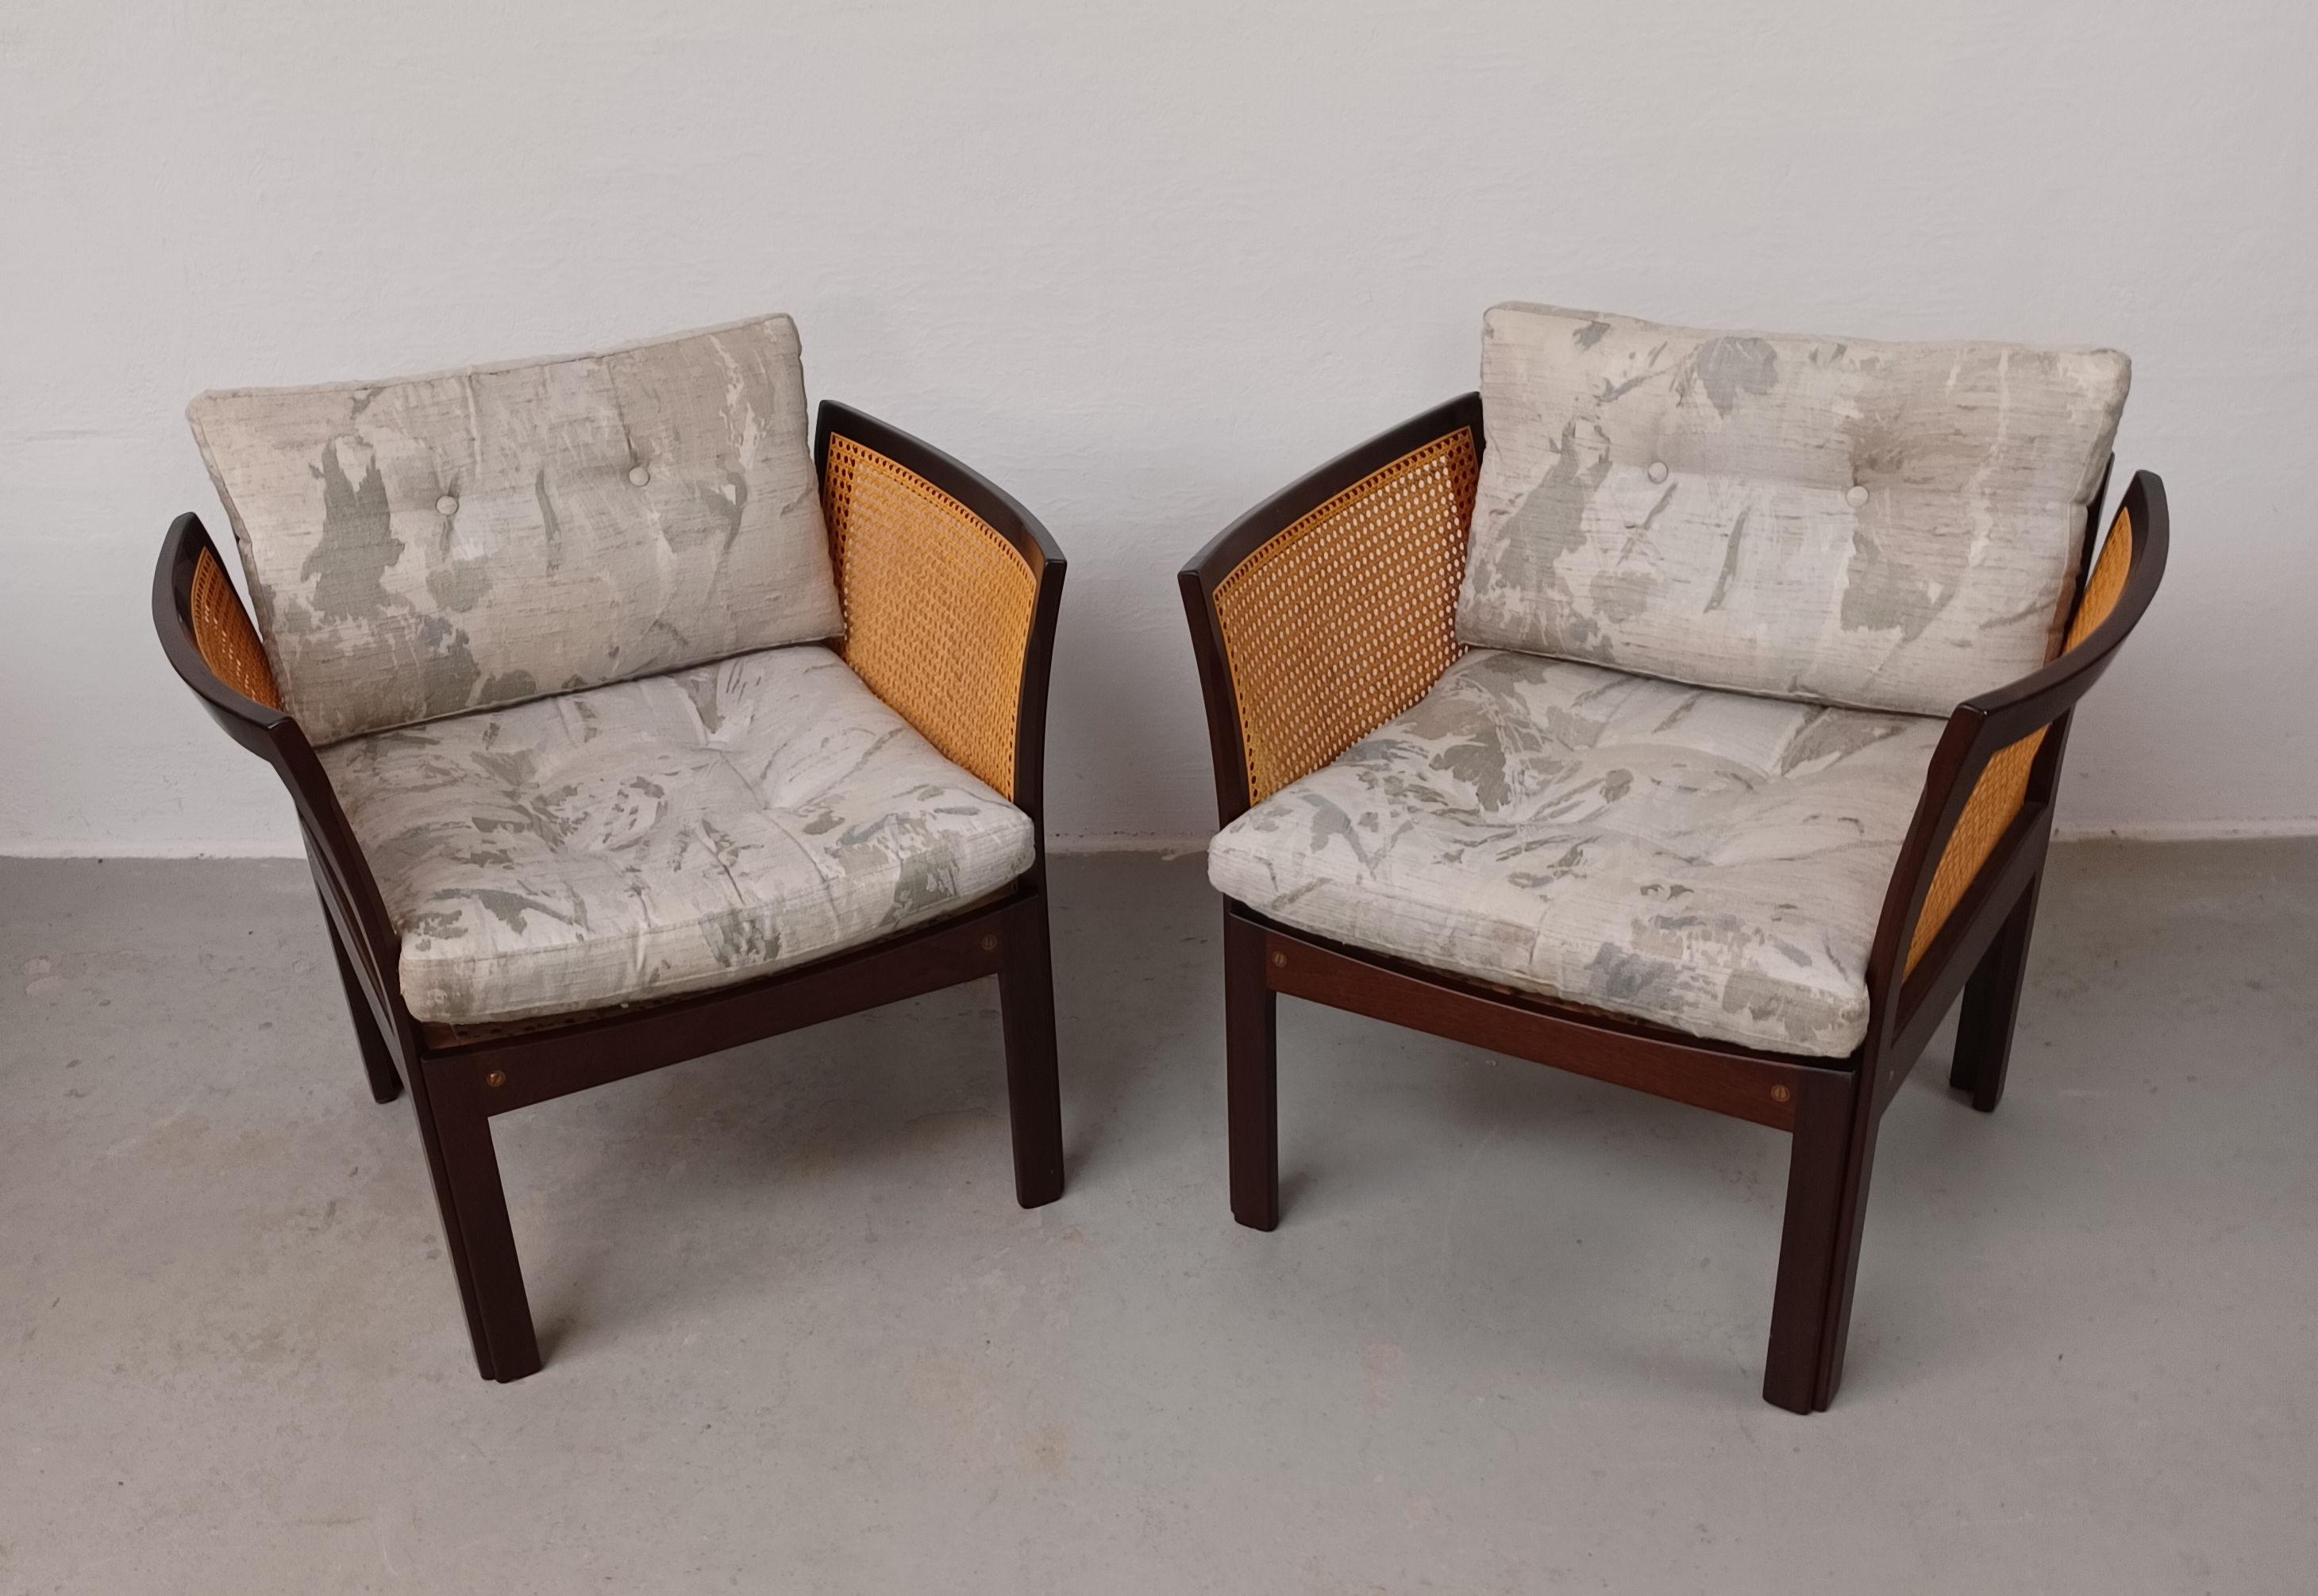 Set of two Illum Vikkelso Danish Plexus easy chairs in mahogany

The plexus armchair series was designed by Illum Wikkelsø in the 1960s and manufactored in the 1960 - 1970´s by CFC Silkeborg in Denmark.

The set of armchairs have been checked,